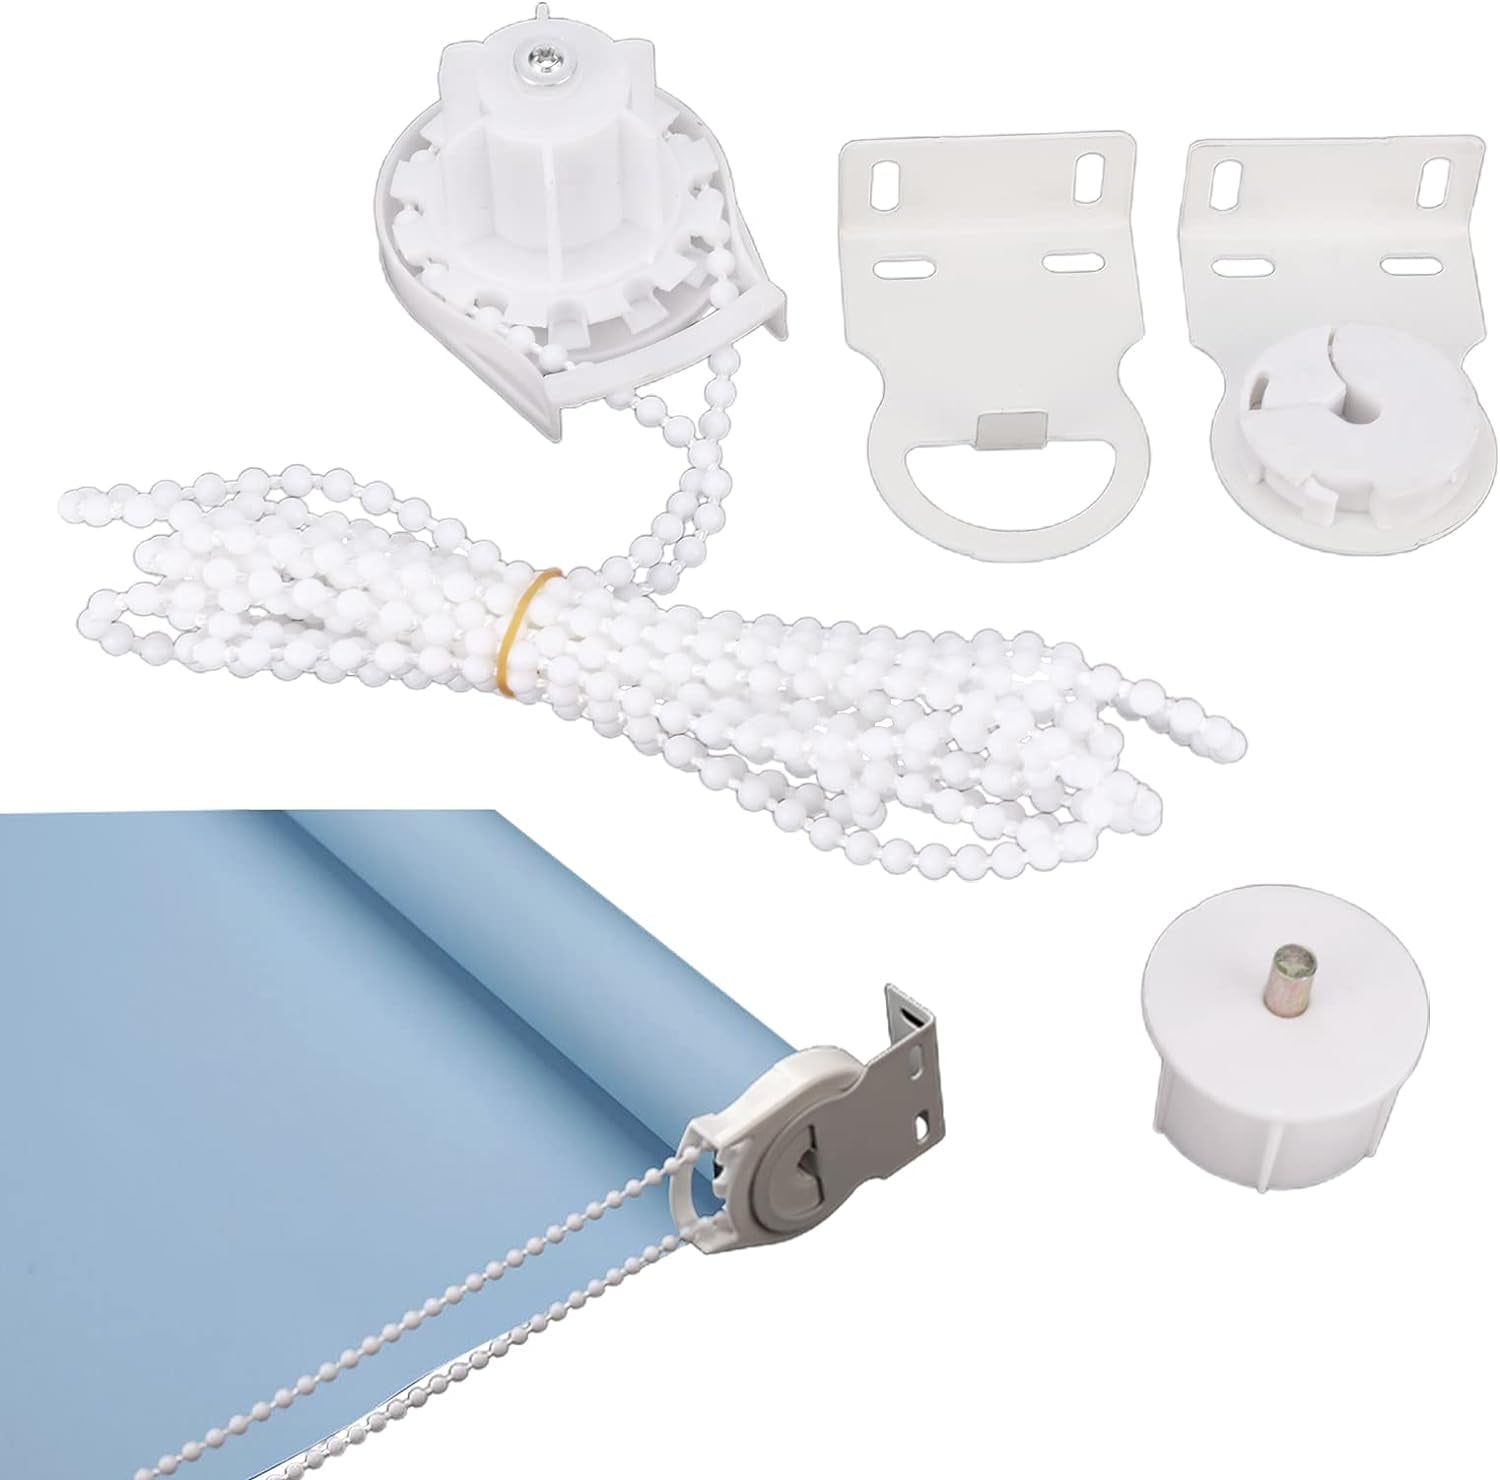 38Mm Roller Blind Replacement Fittings, Metal Roller Blind Fittings Repair Parts Kit Brackets, Roller Shade Hardware for Fixing Curtain Blinds Shades Windows(White)